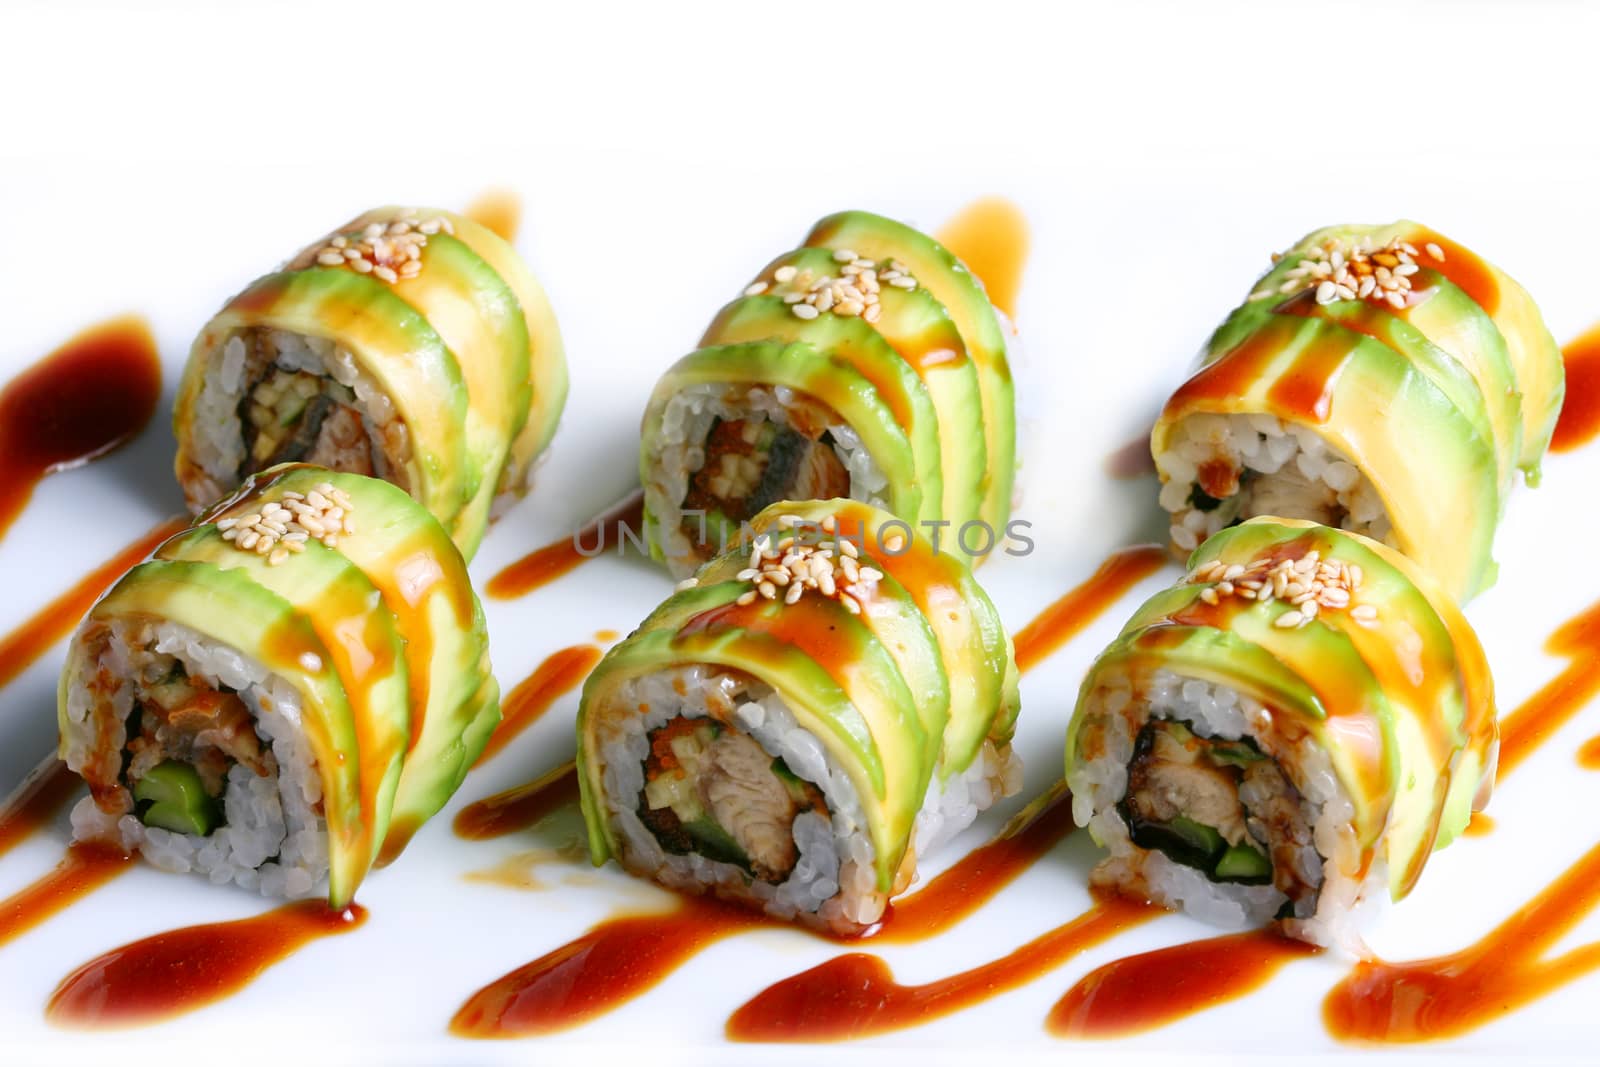 Dragon Roll Recipe - Sushi Roll Recipes very famous sushi recipe in Japan by Mercedess